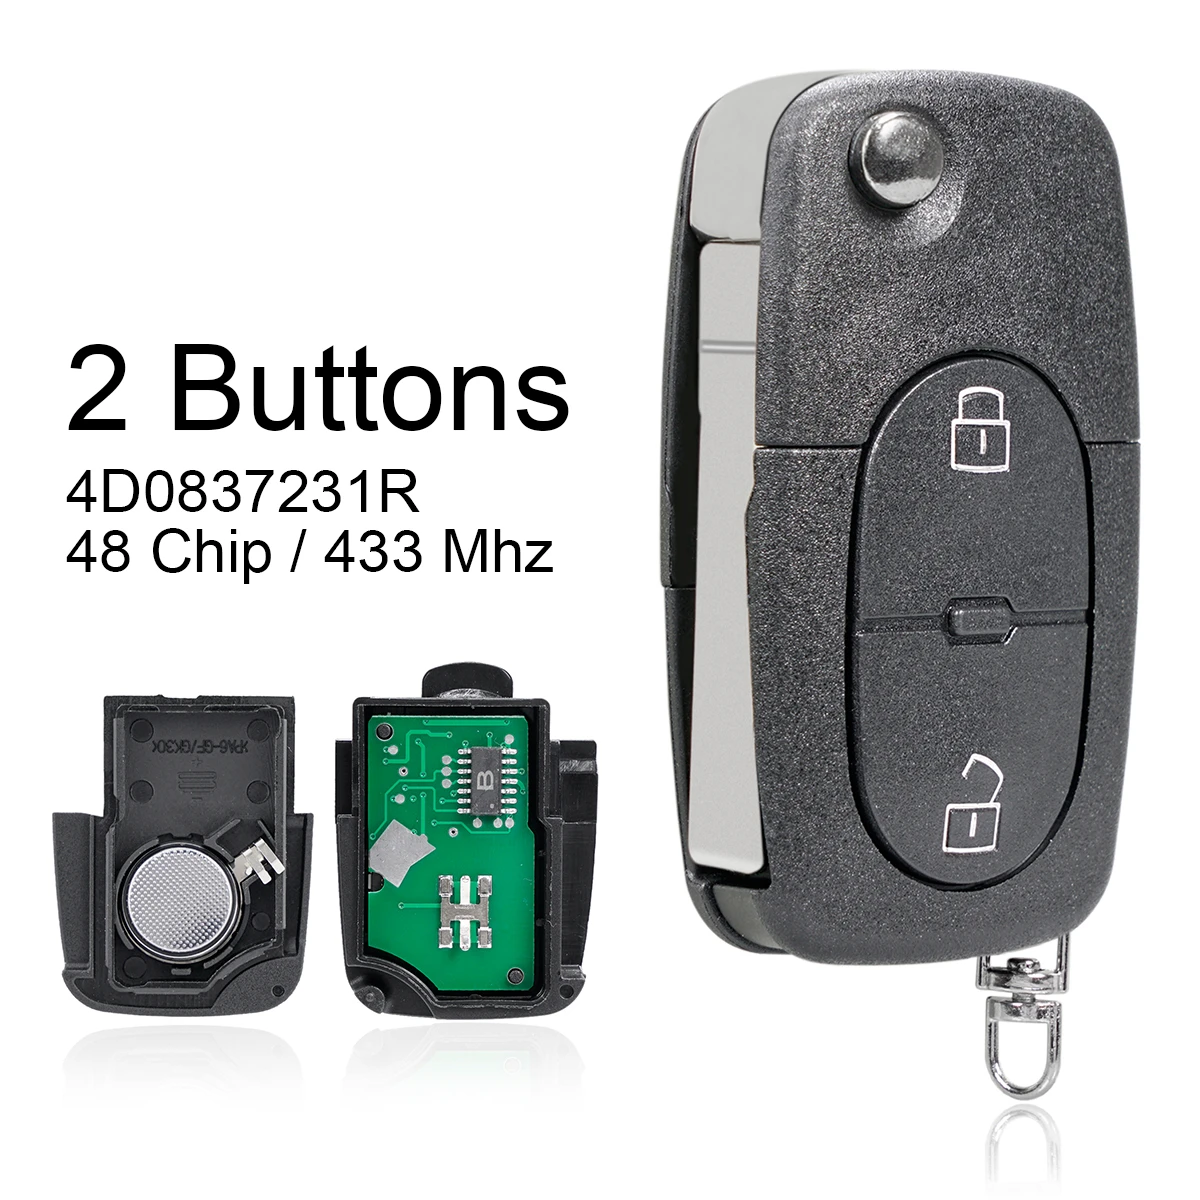 433Mhz 2Buttons Car Remote key with ID48 Chip / 4D0837231R Fit for Au-di A3 A4 A6 A8  B6 car flip folding remote key 433mhz with id48 chip for great wall hover h3 h5 gwm haval h3 h5 steed replacement remote key shell